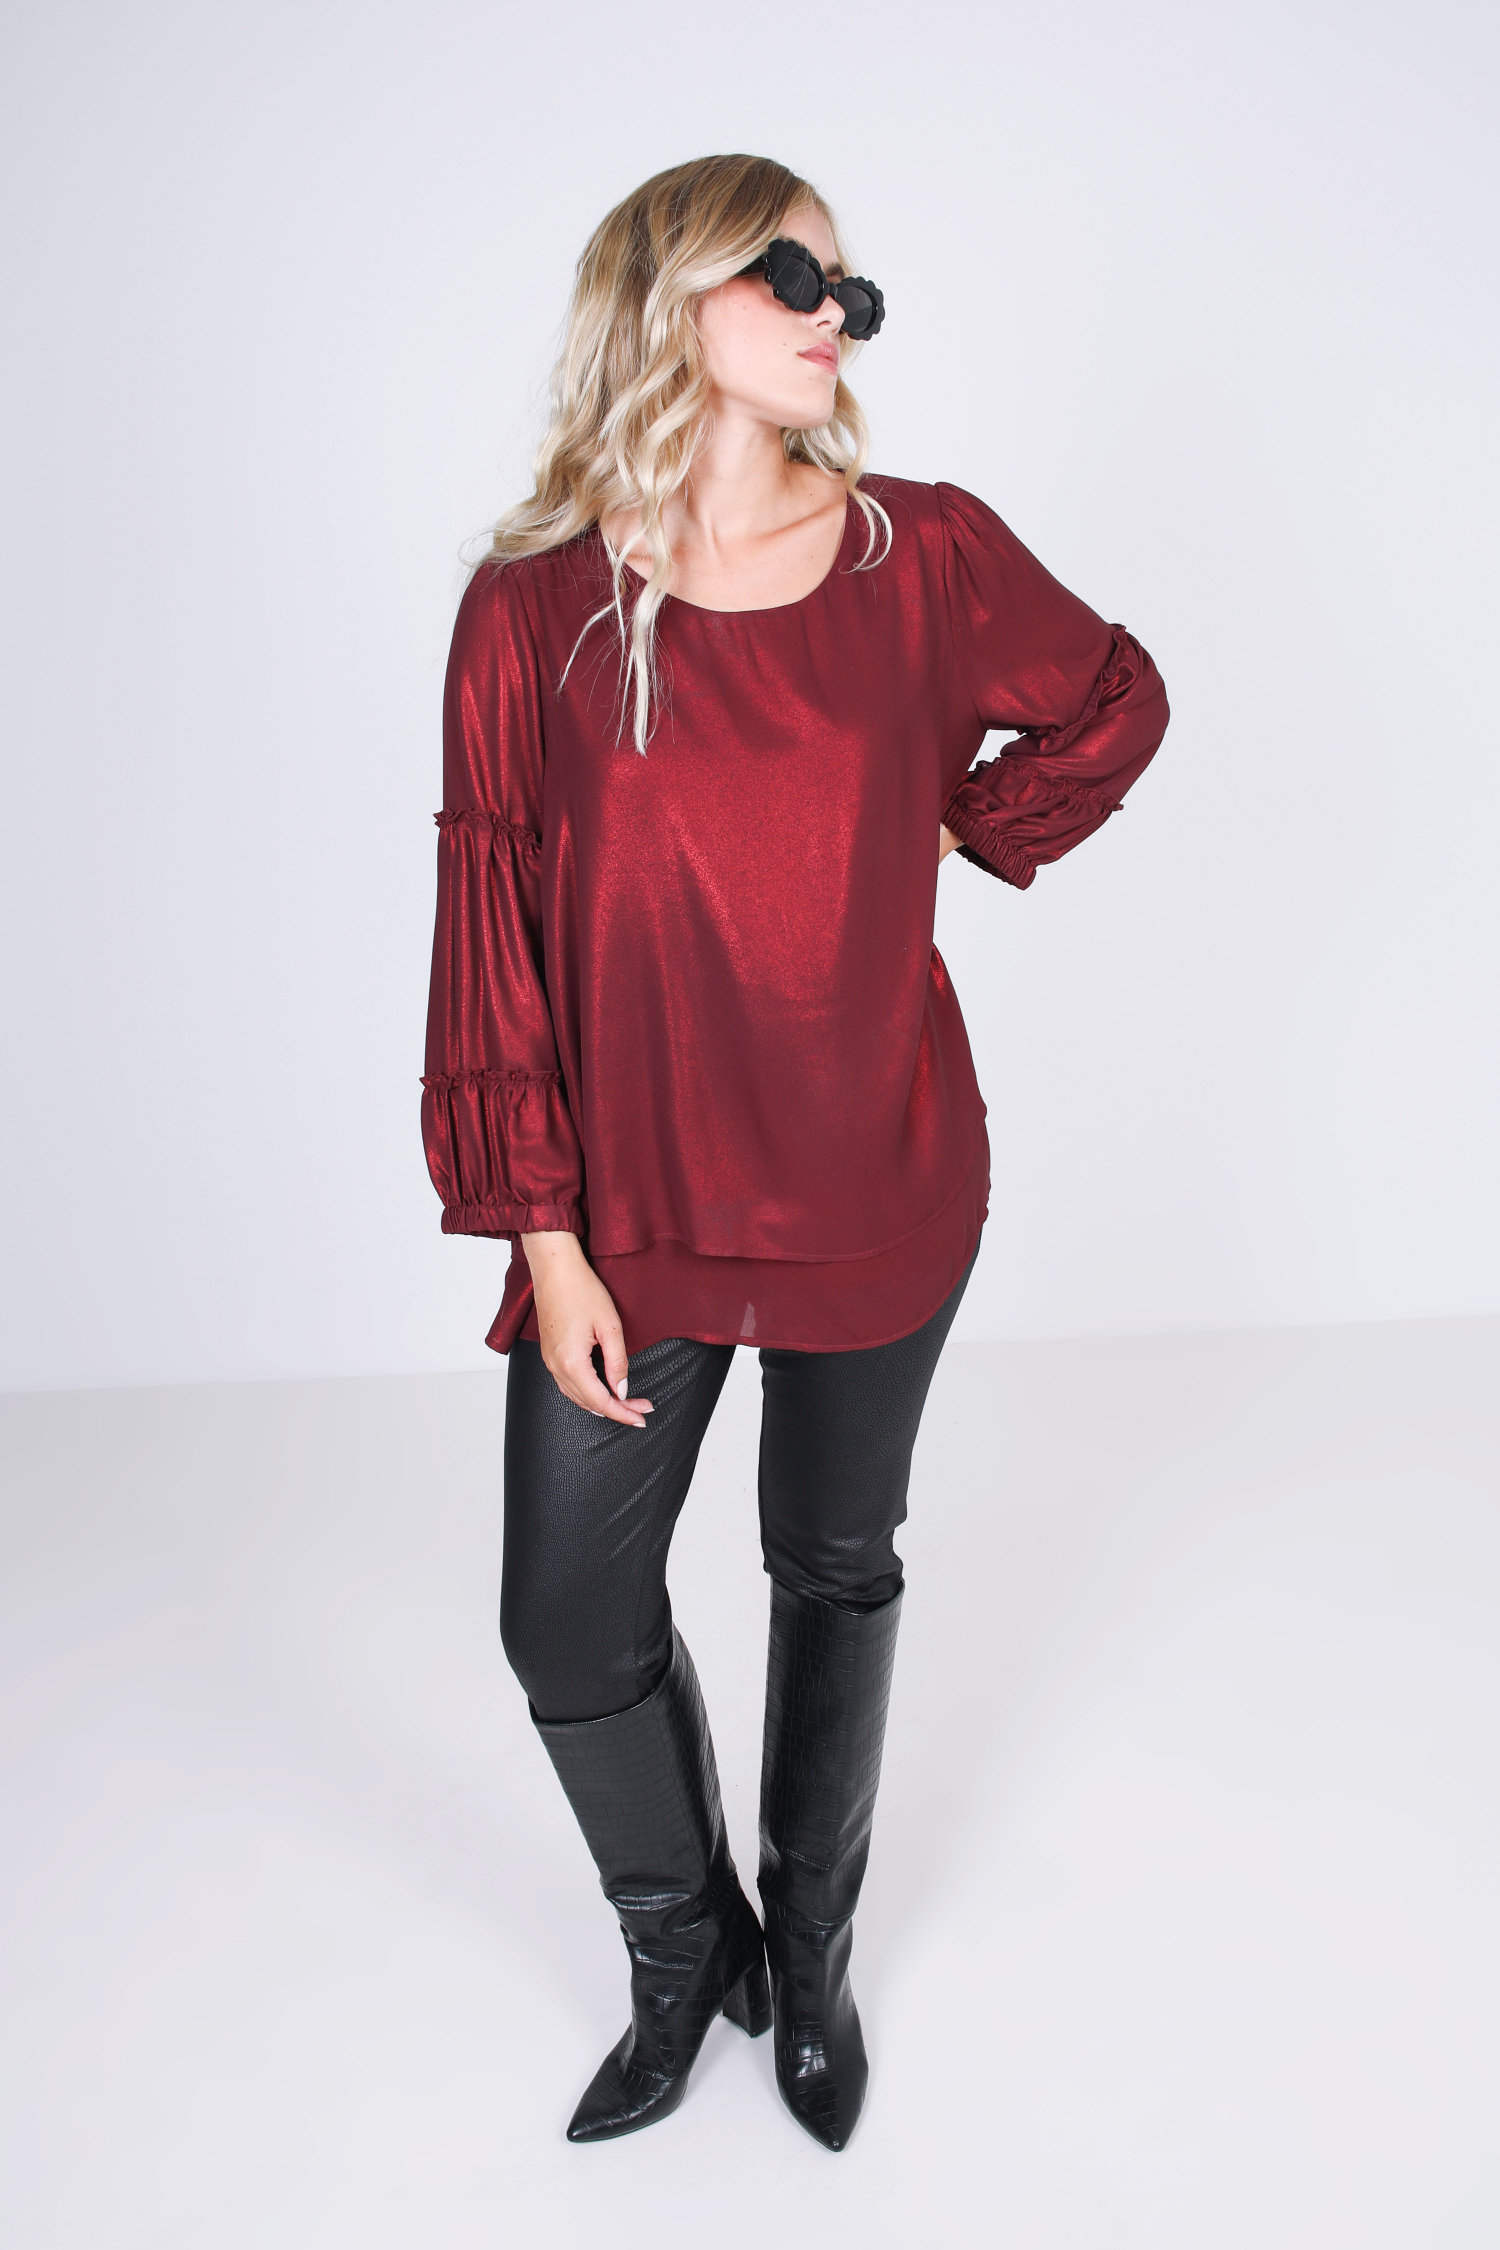 trapeze blouse with sequined effect overlay